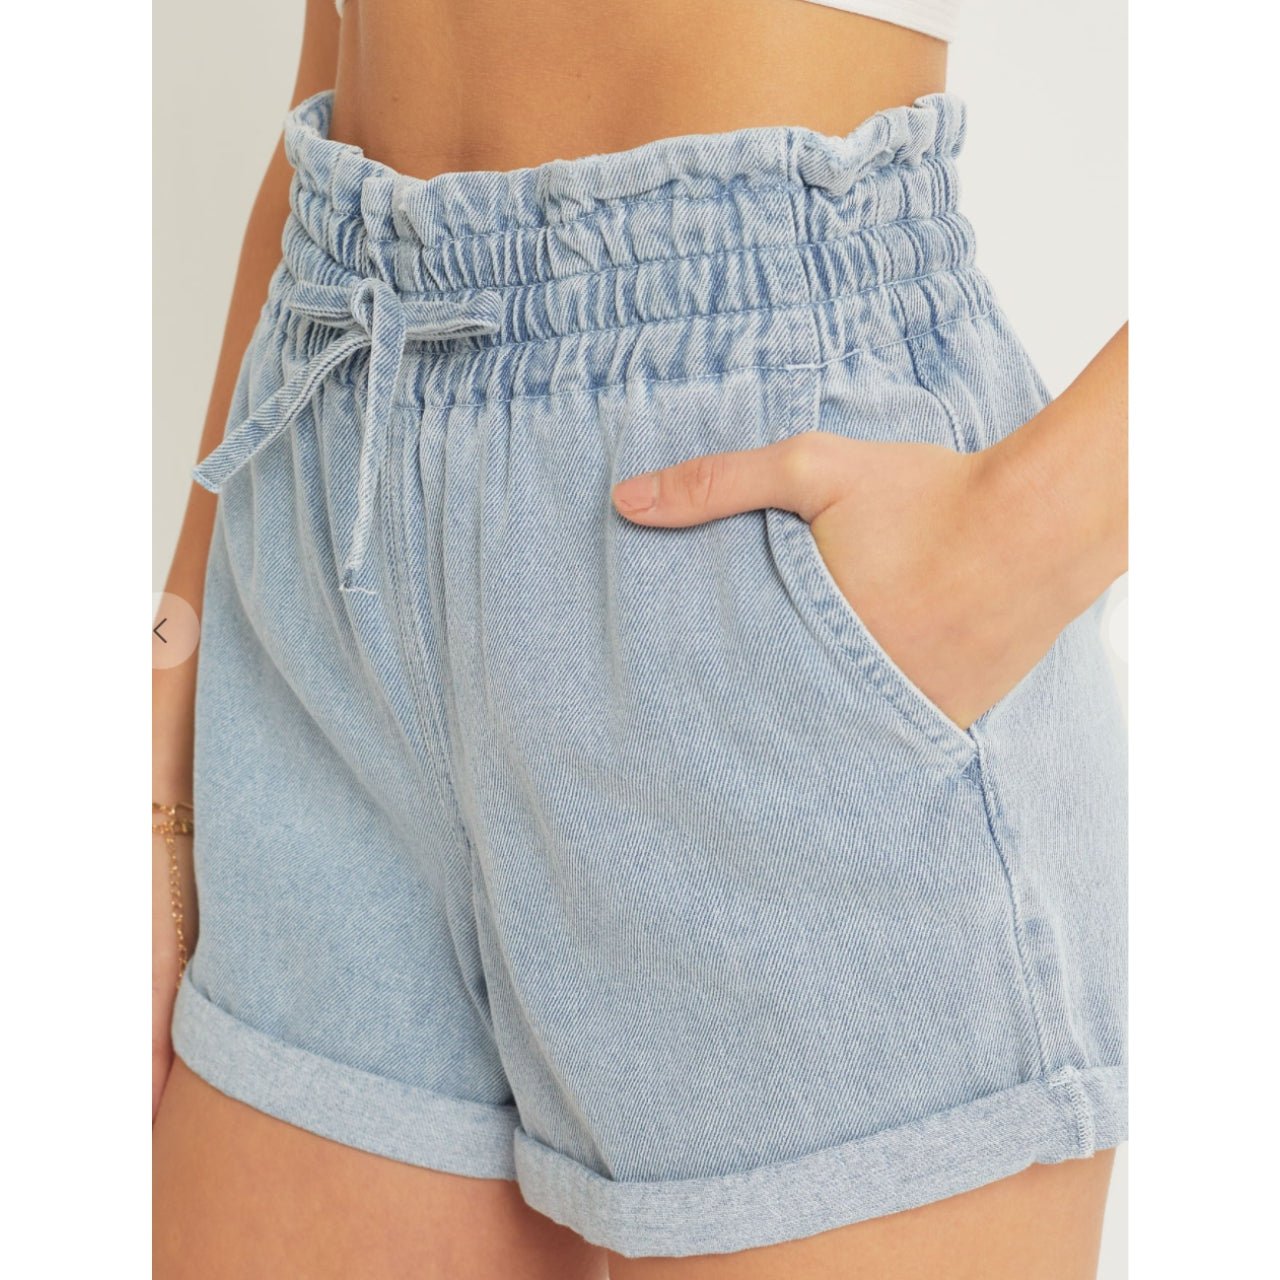 Carlie Denim Drawstring Rolled Hem Shorts With Paper Bag Waist - The Graphic Tee